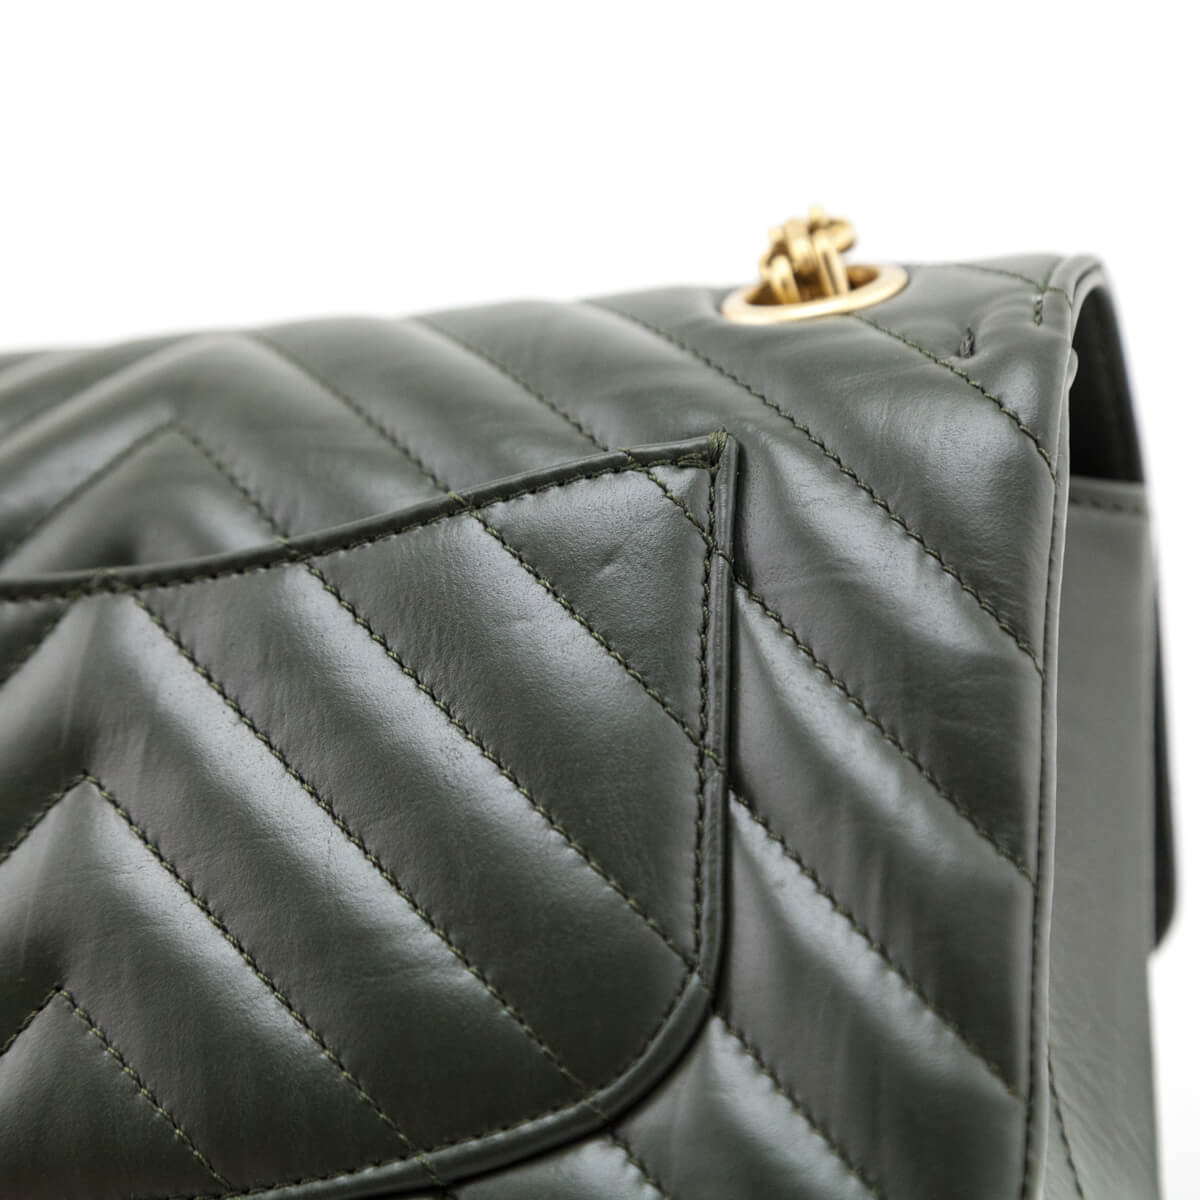 Chanel Metallic Green Chevron Quilted Aged Calfskin Small